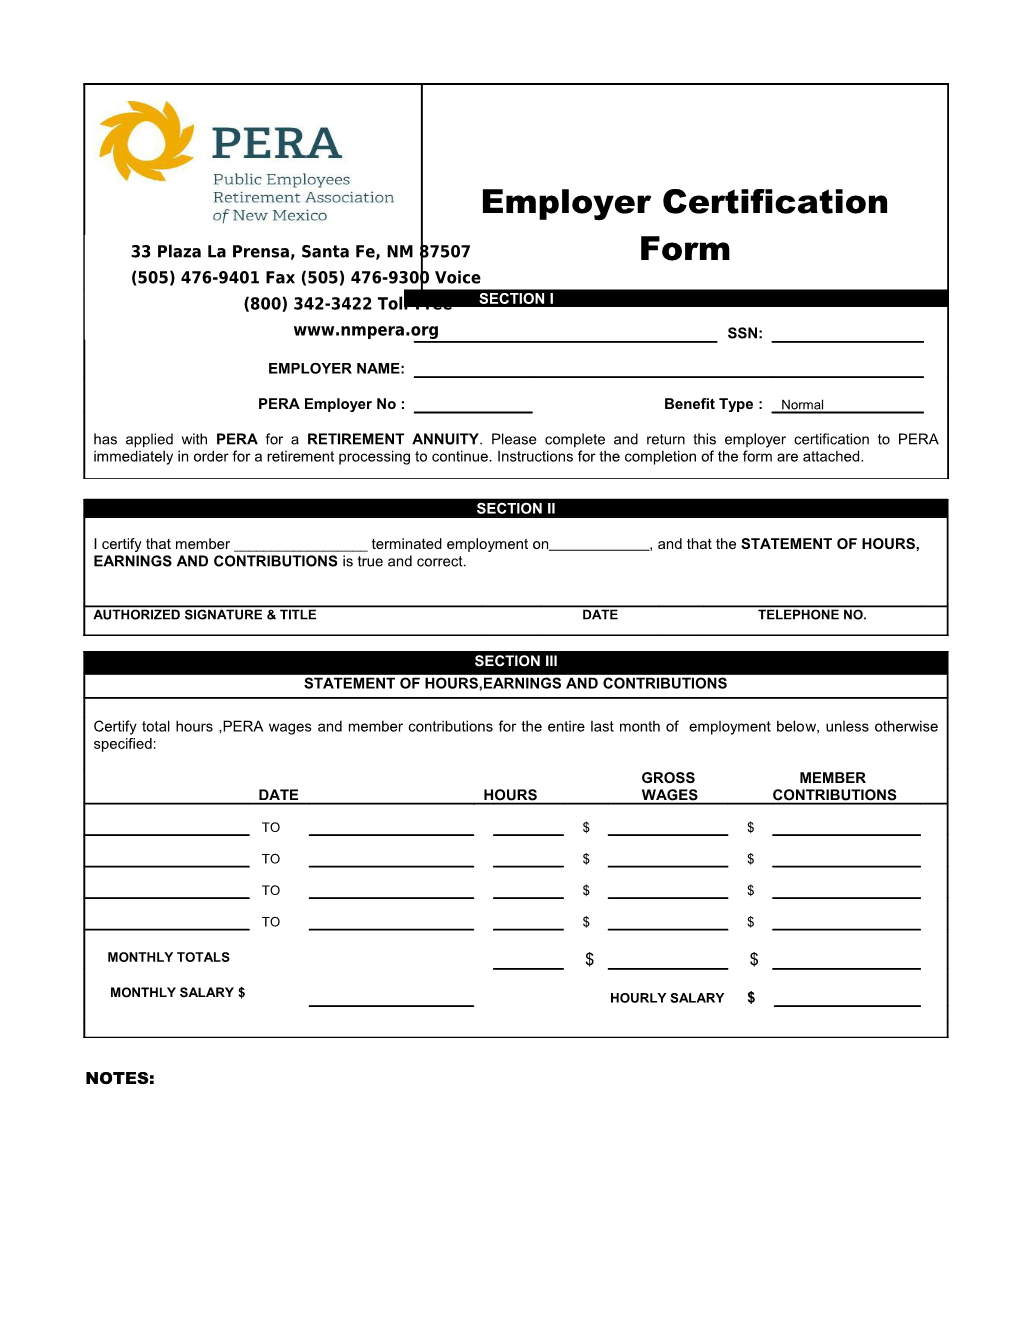 Employer Certification Form